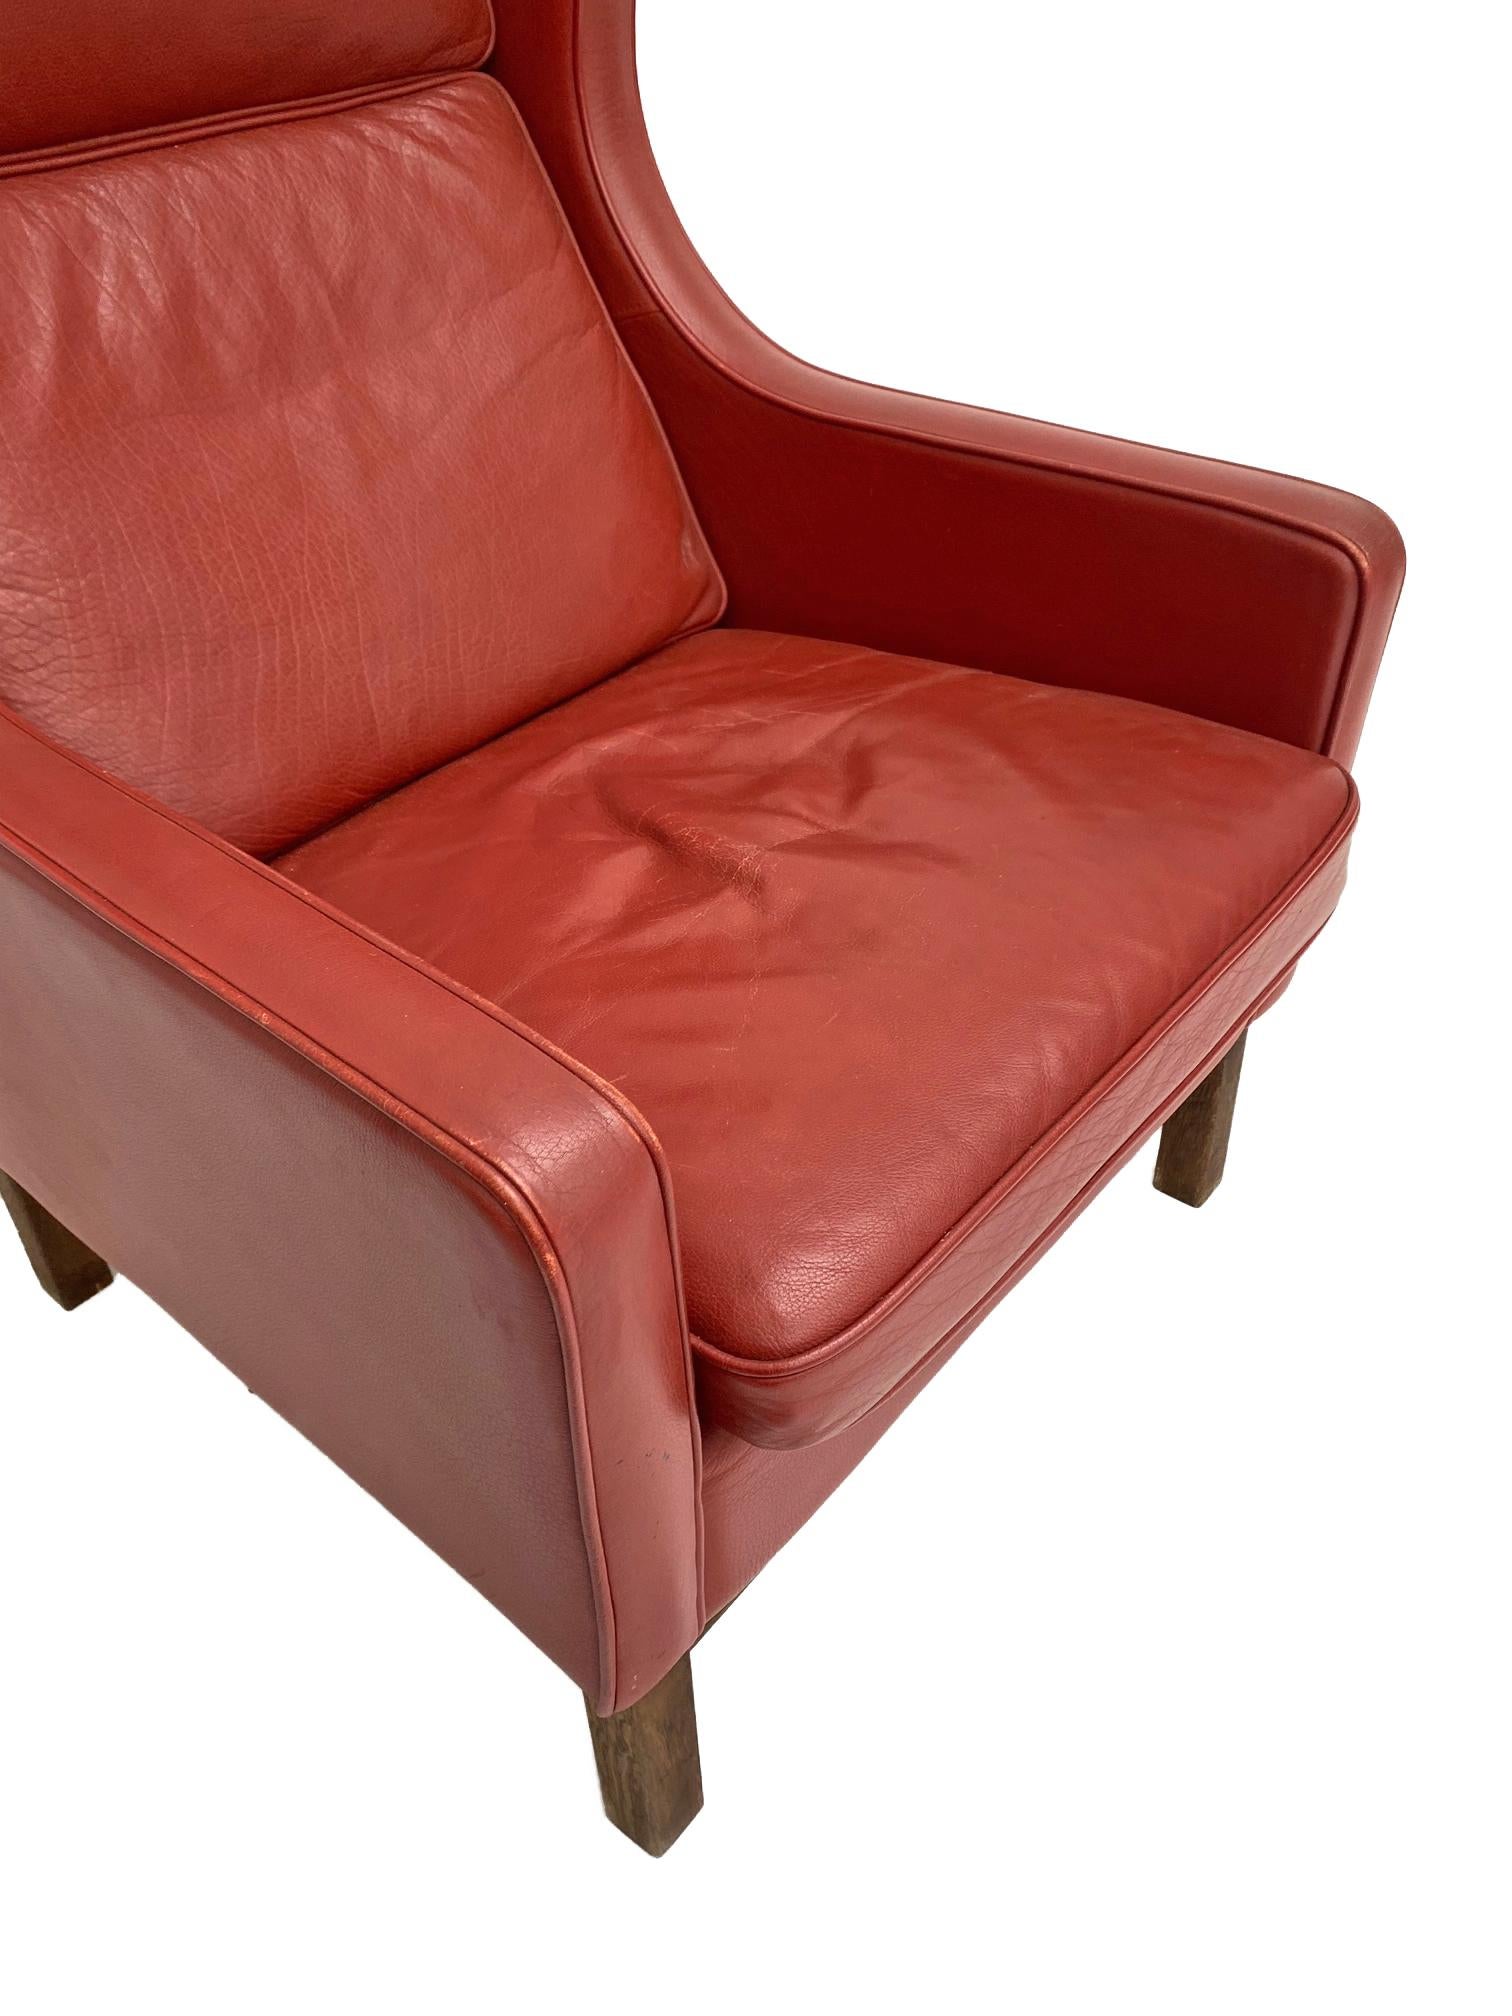 A classic yet striking design, this red leather 3 highback armchair by Mogens Hansen would make a wonderful addition to any home or work environment. 

In a charming Postbox red colour, this armchair would make a prominent feature for any space.